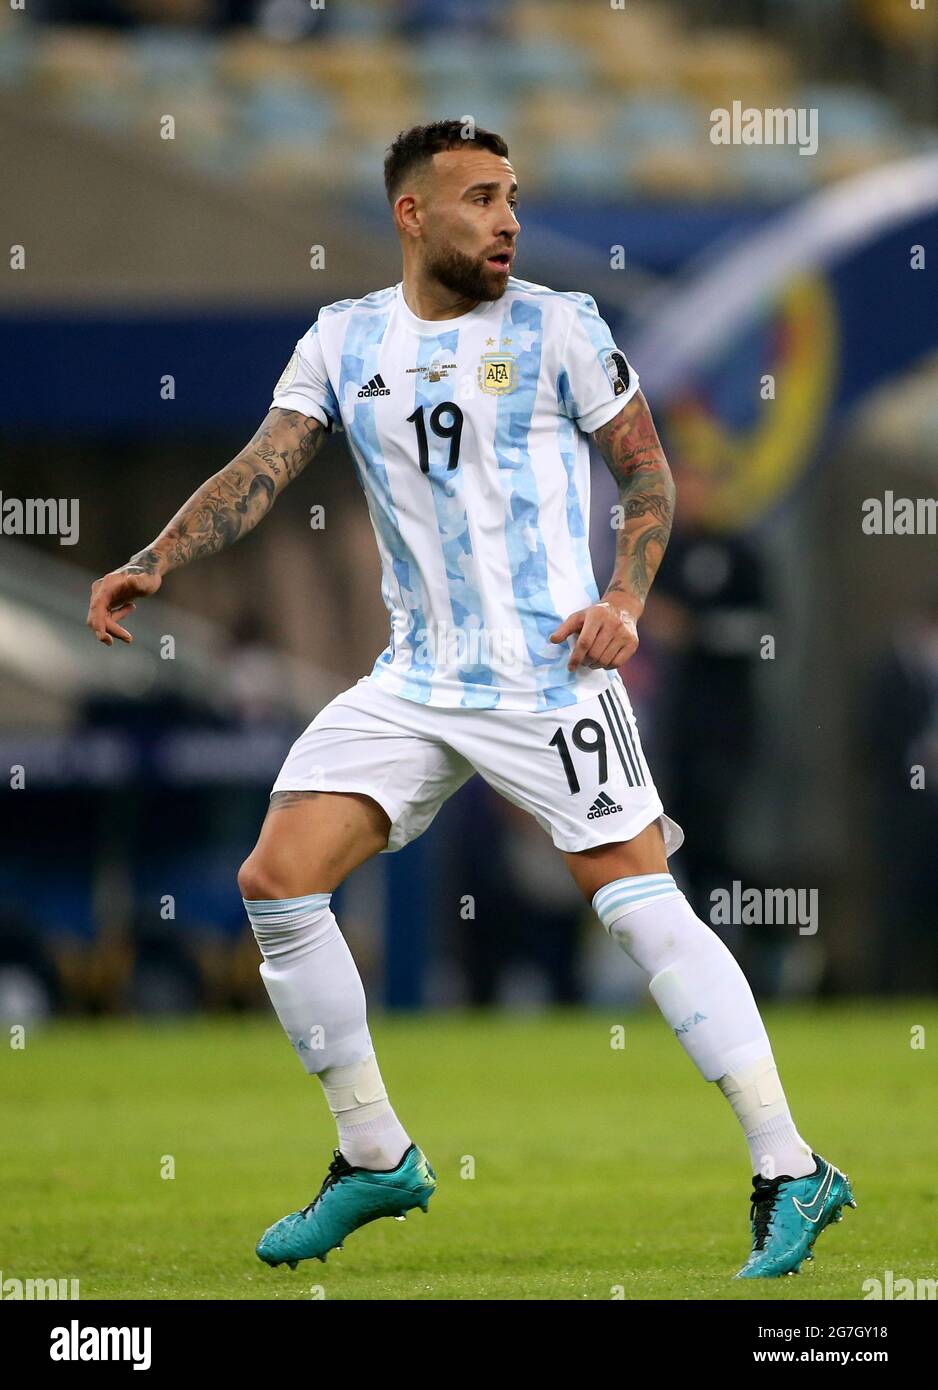 RIO DE JANEIRO, BRAZIL - JULY 10: Nicolas Otamendi of Argentina in action ,during the Final Match between Brazil and Argentina at Maracana Stadium on July 10, 2021 in Rio de Janeiro, Brazil. (MB Media) Stock Photo